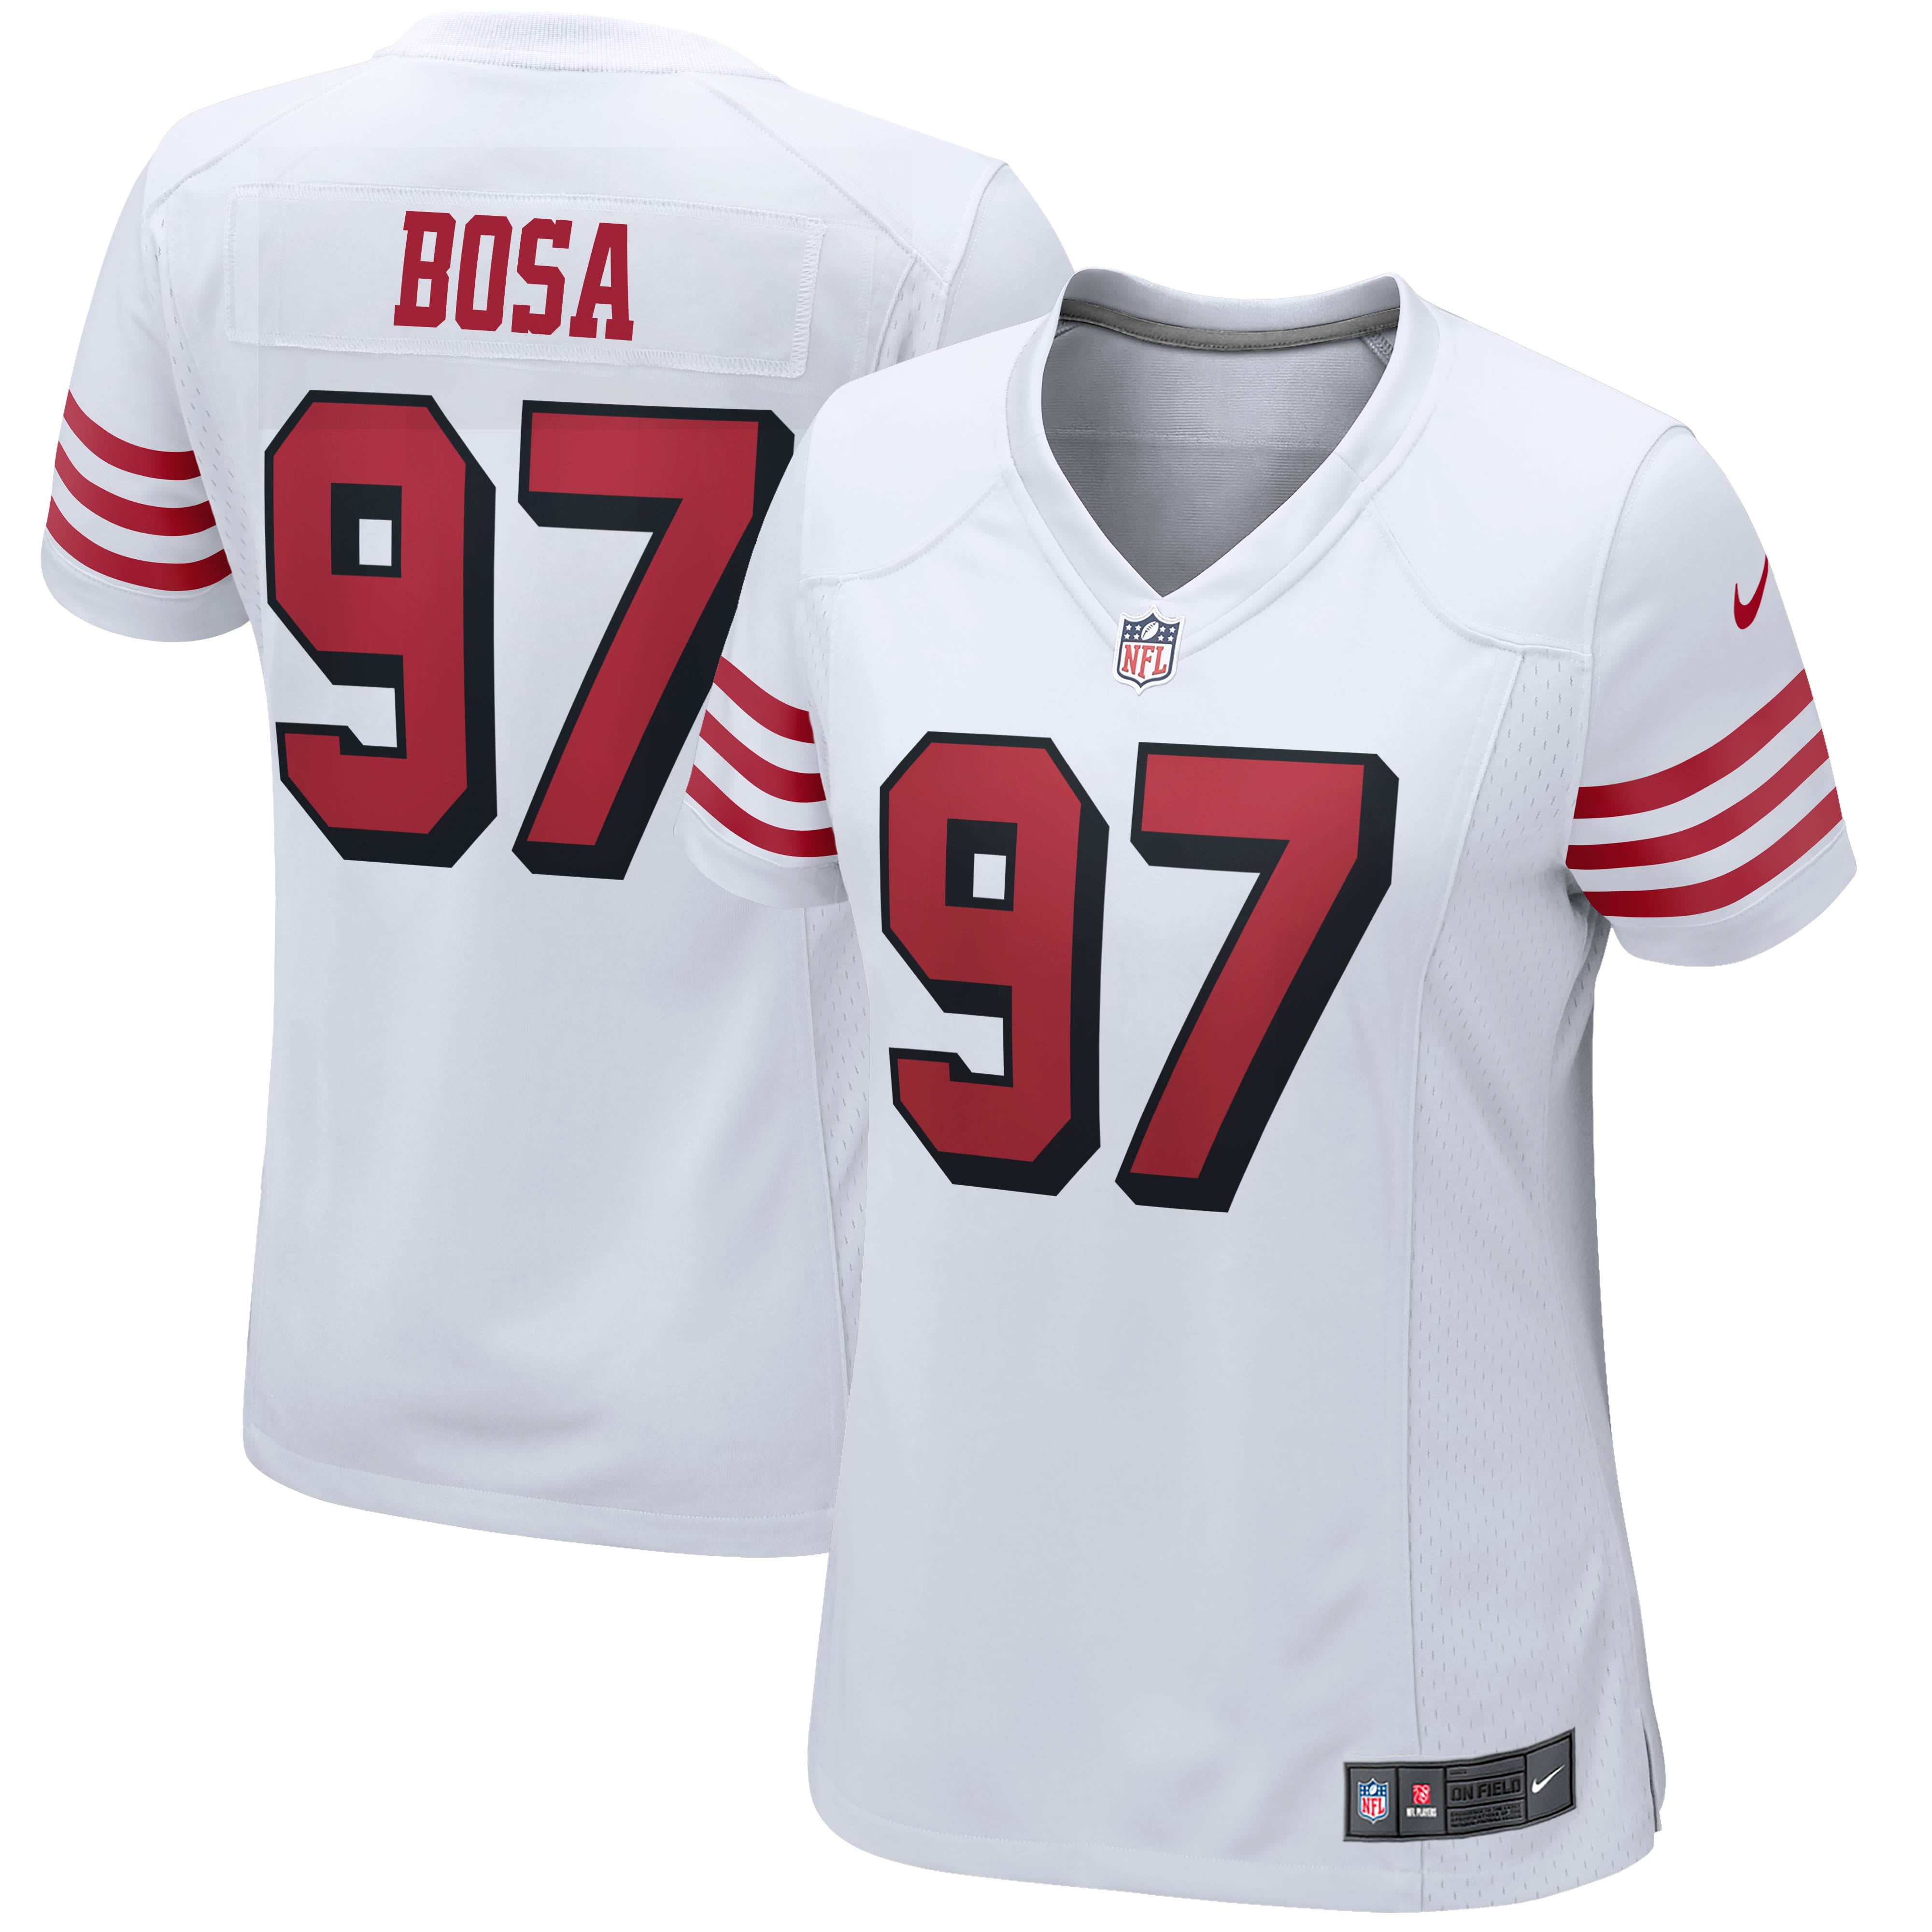 49ers alternate jersey for sale